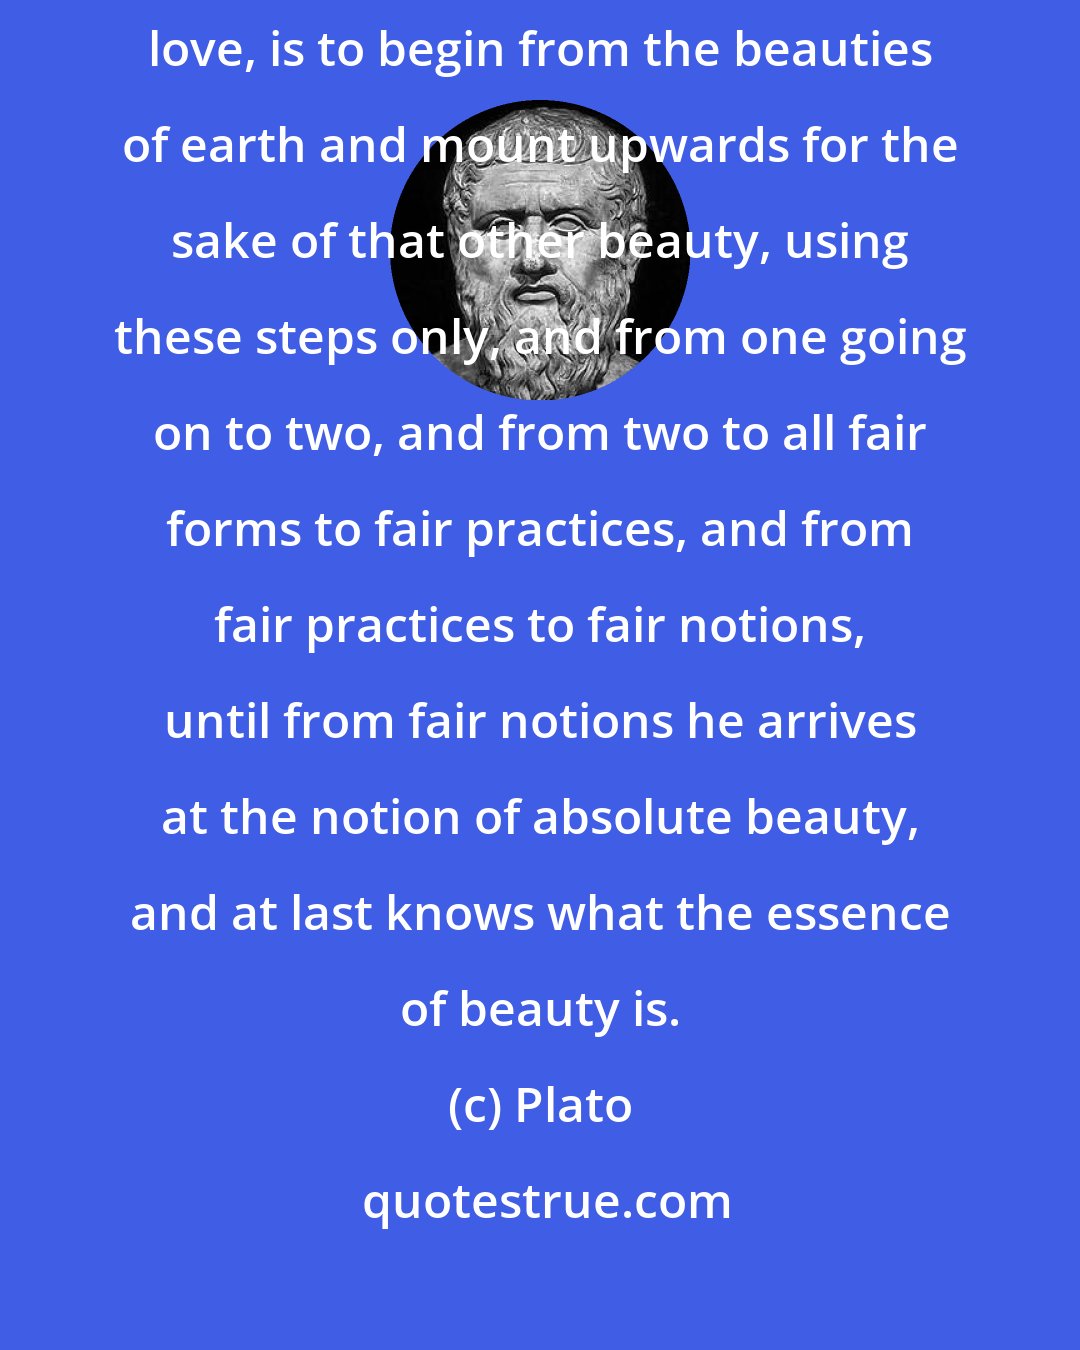 Plato: And the true order of going, or being led by another, to the things of love, is to begin from the beauties of earth and mount upwards for the sake of that other beauty, using these steps only, and from one going on to two, and from two to all fair forms to fair practices, and from fair practices to fair notions, until from fair notions he arrives at the notion of absolute beauty, and at last knows what the essence of beauty is.